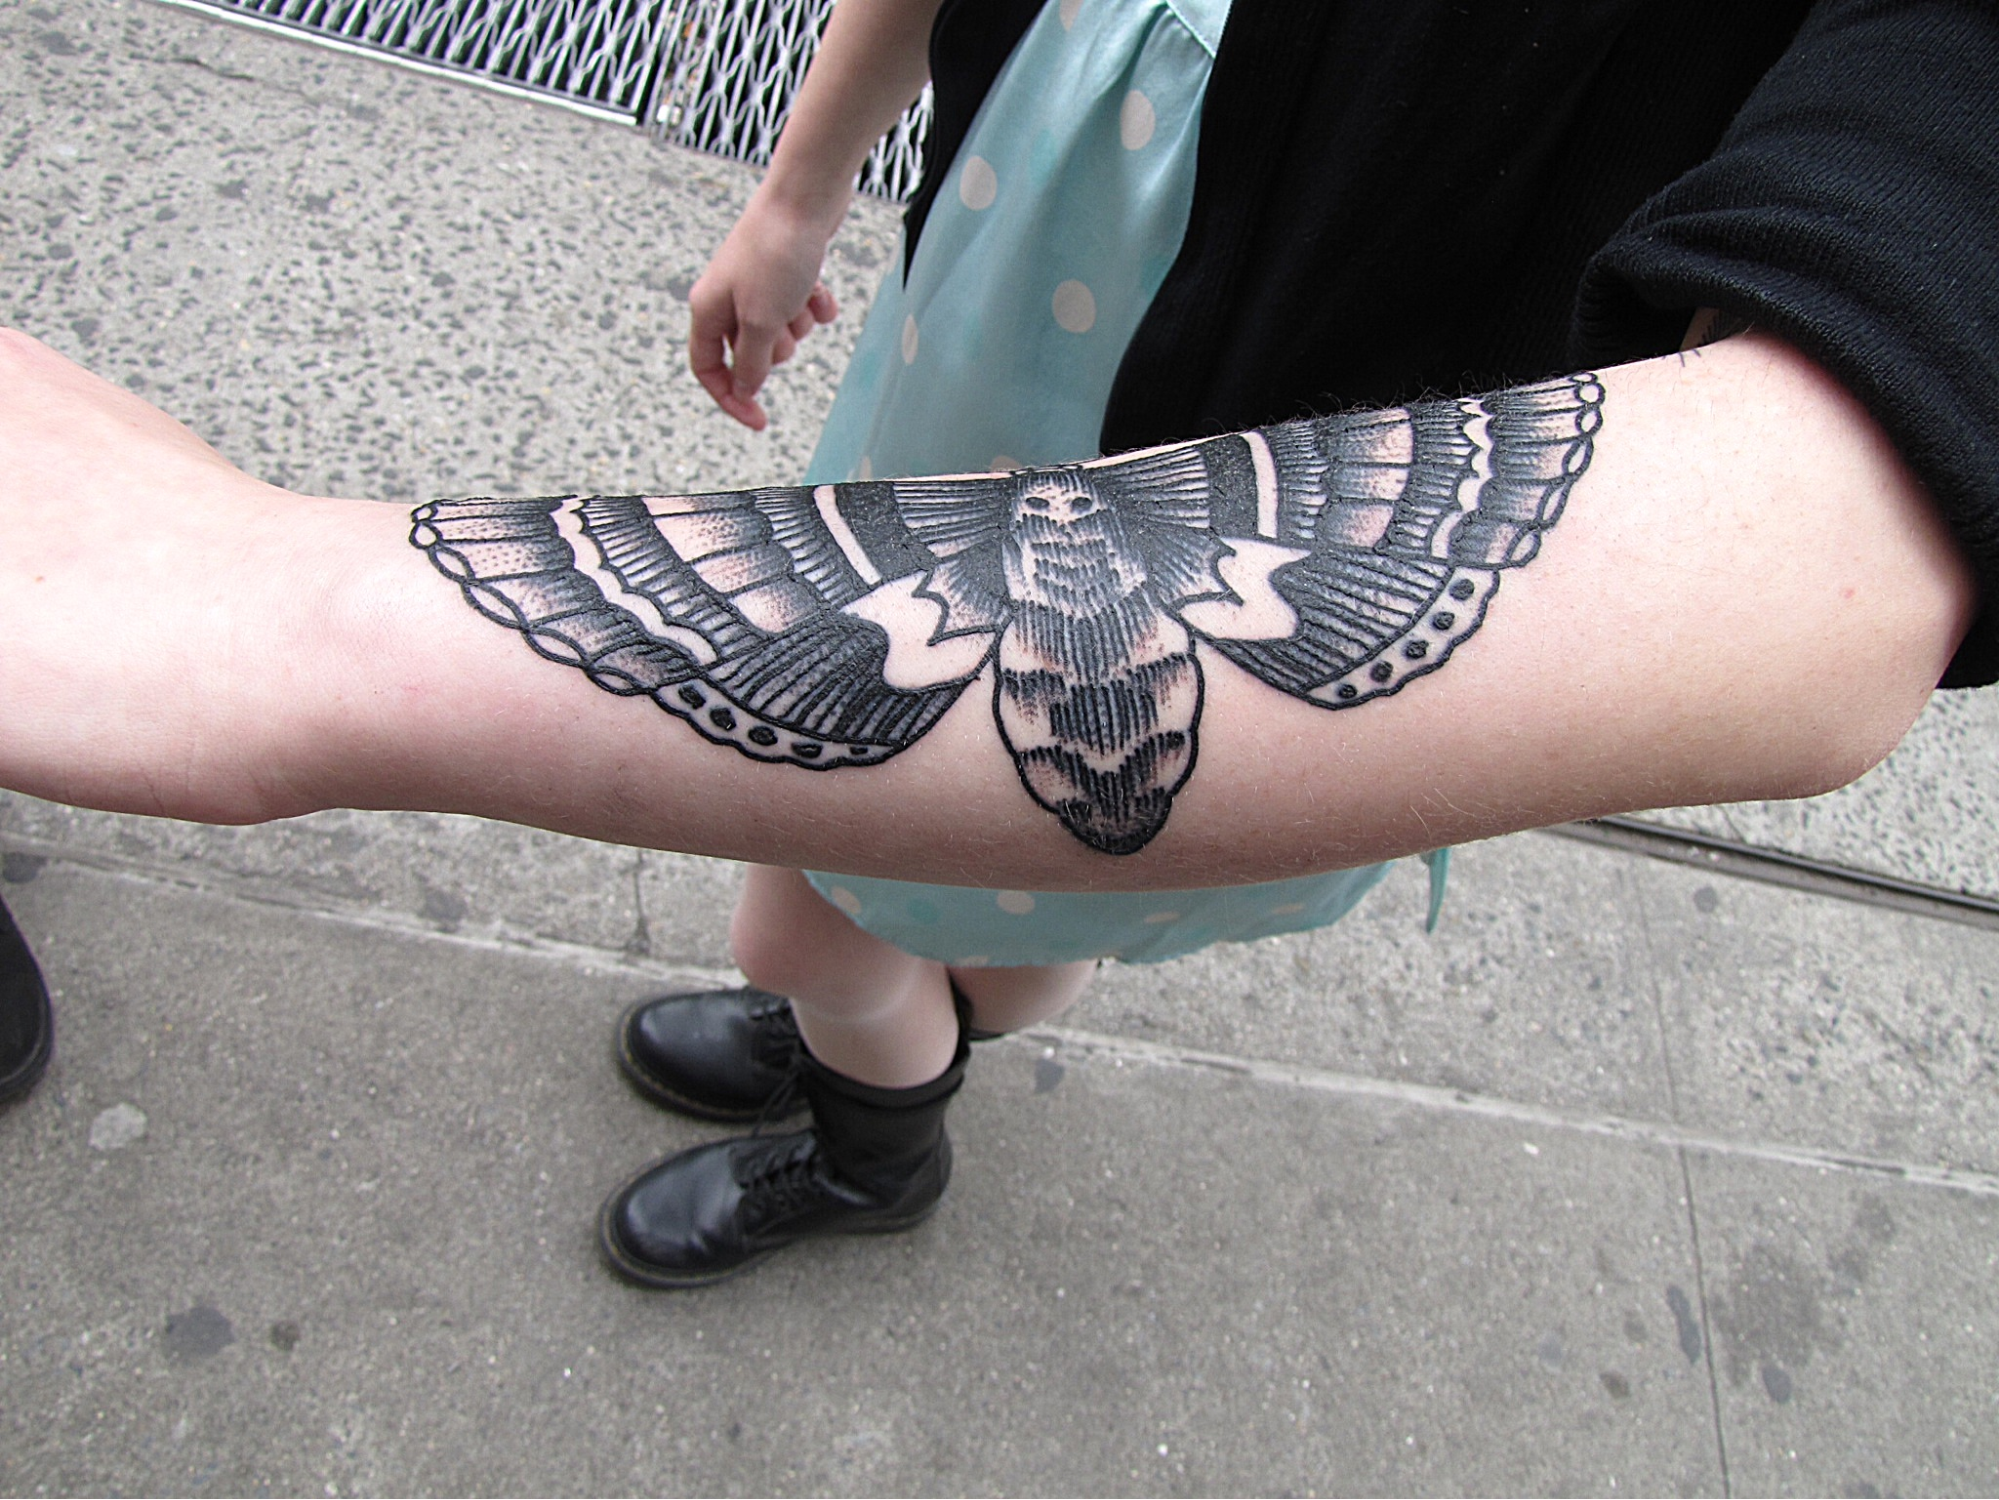 Moth Tattoos: 60+ Designs of Different Styles for Men & Women - InkMatch